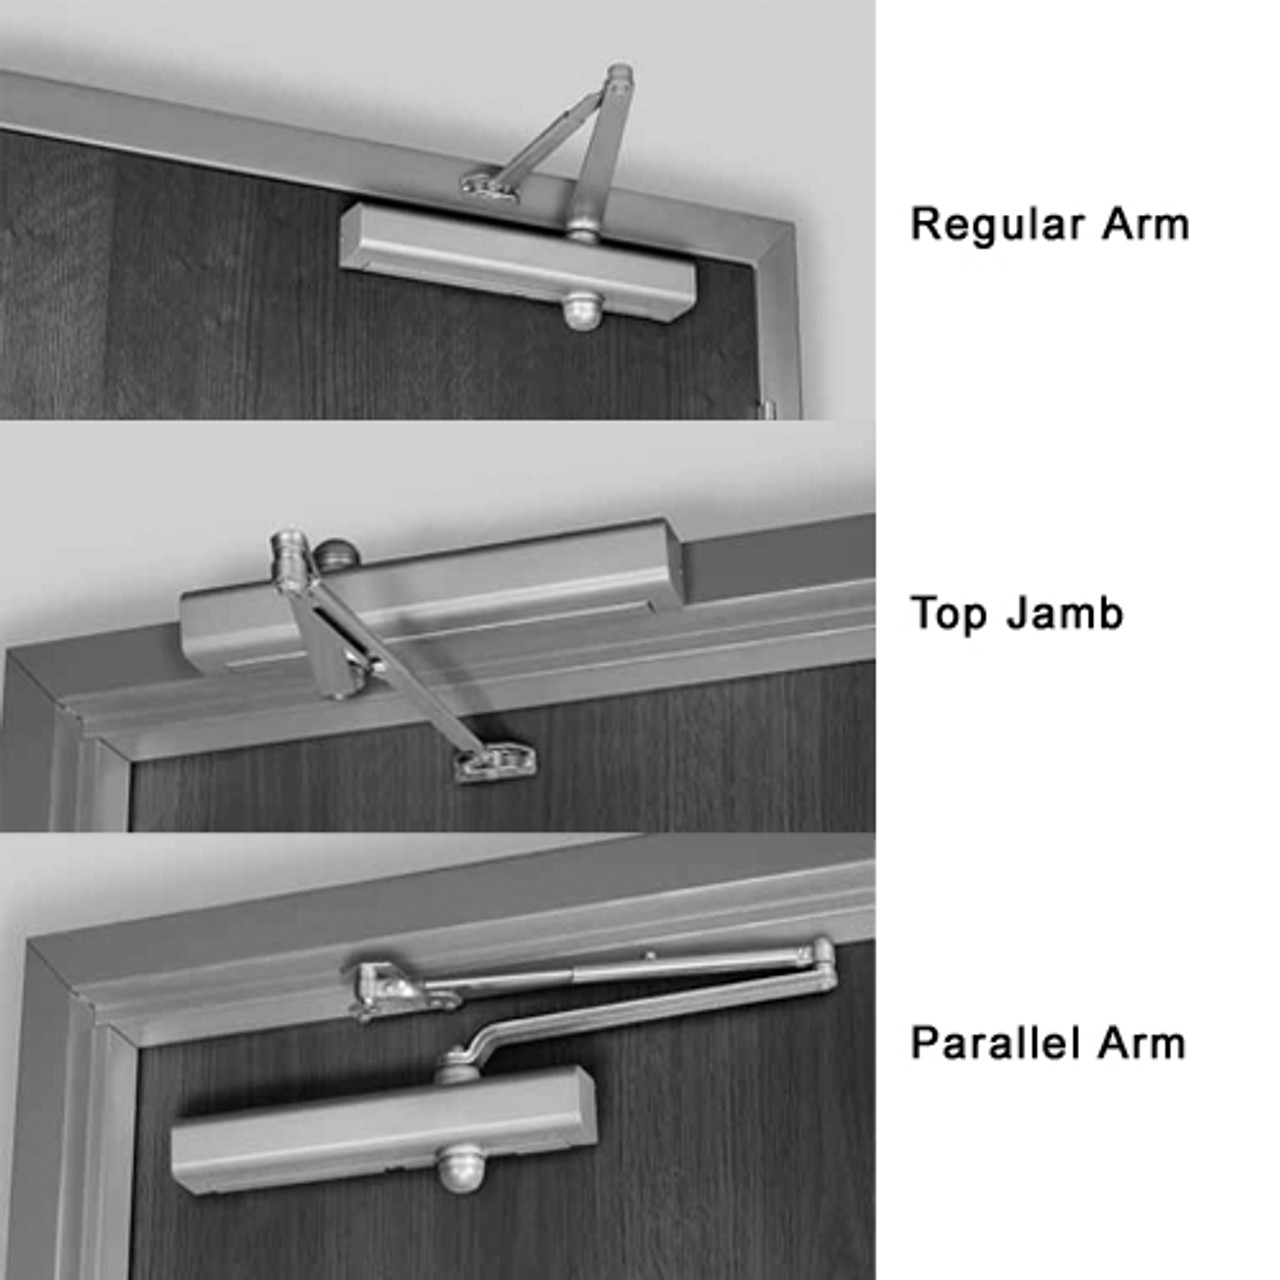 8301H-696 Norton 8000 Series Hold Open Door Closers with Regular Parallel and Top Jamb to 2-3/4 inch Reveal in Gold Finish